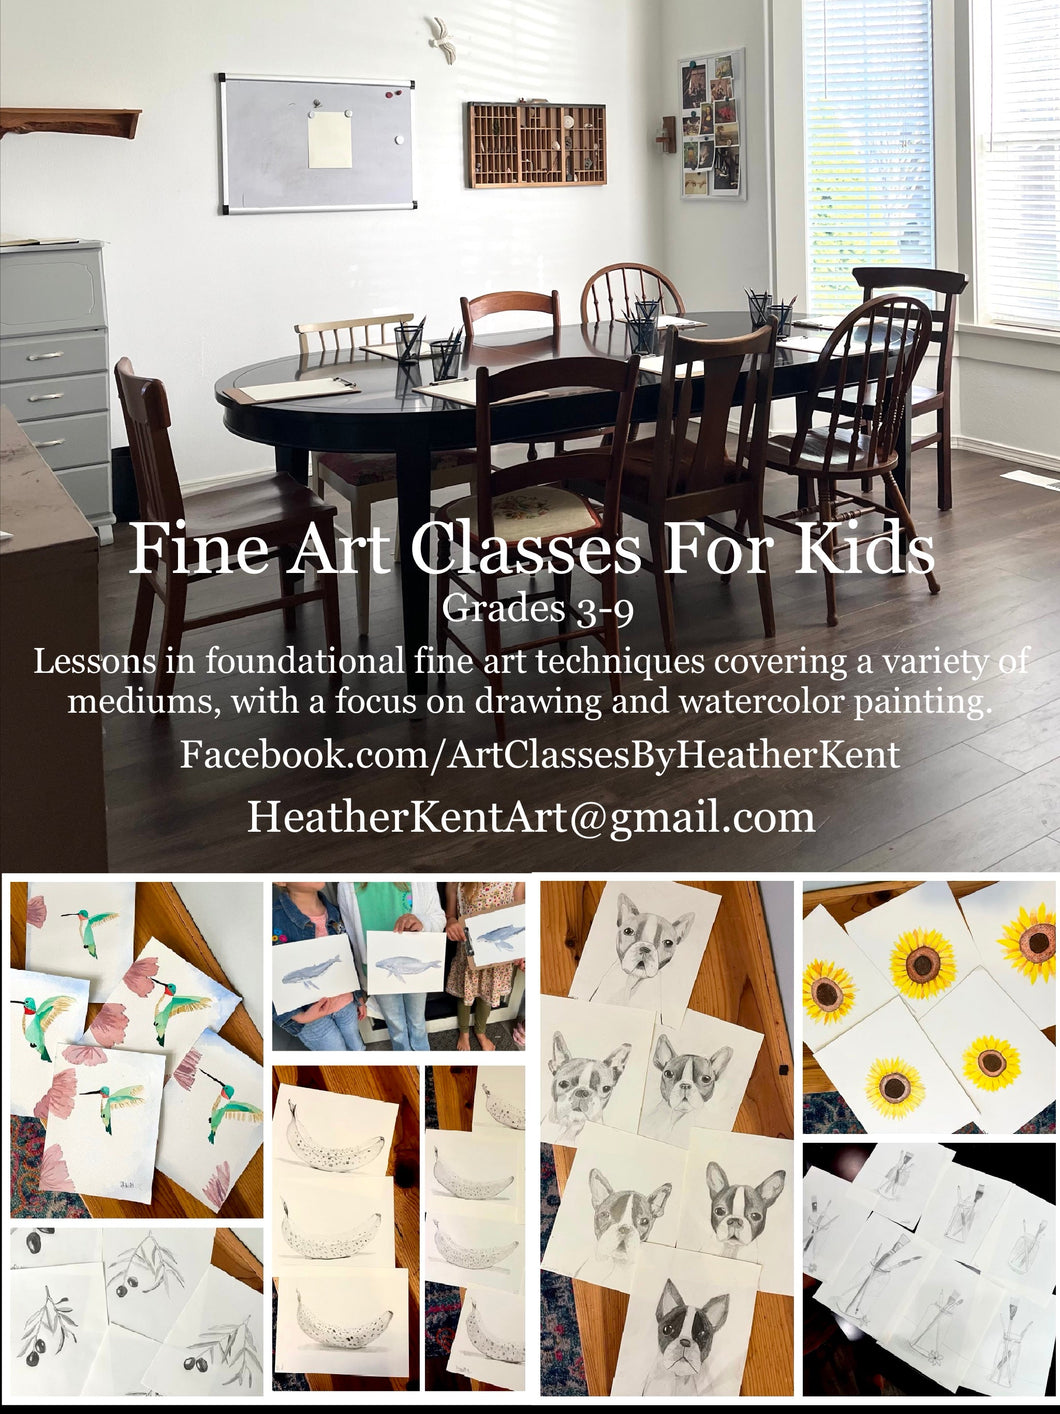 Wednesday, July 17th (10am-12pm) Art Class Workshop - Watercolor